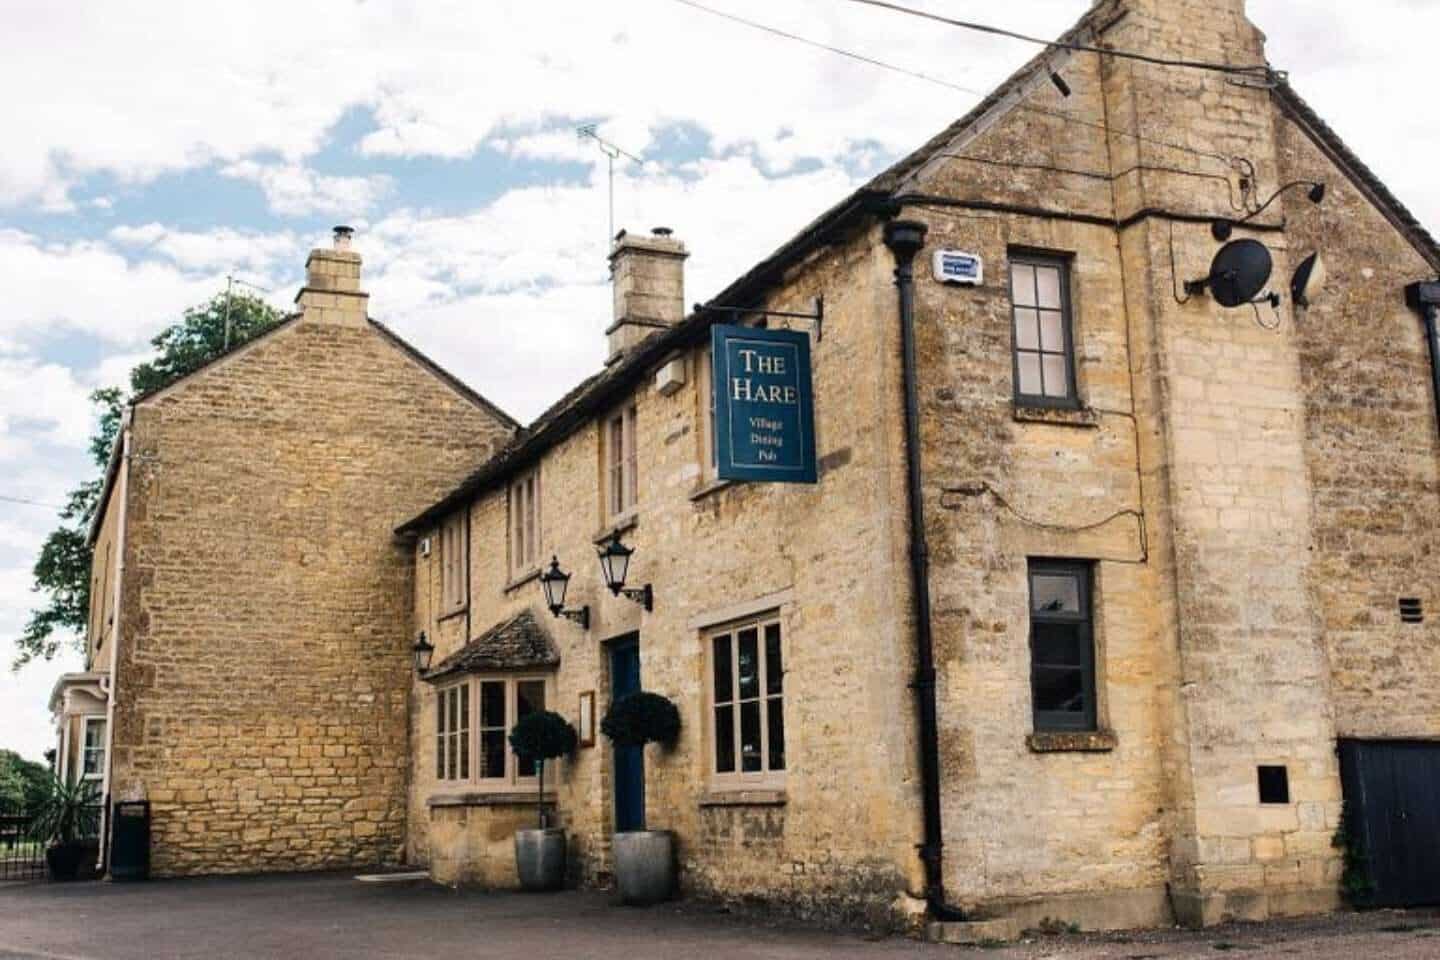 The Milton Hare at Chipping Norton